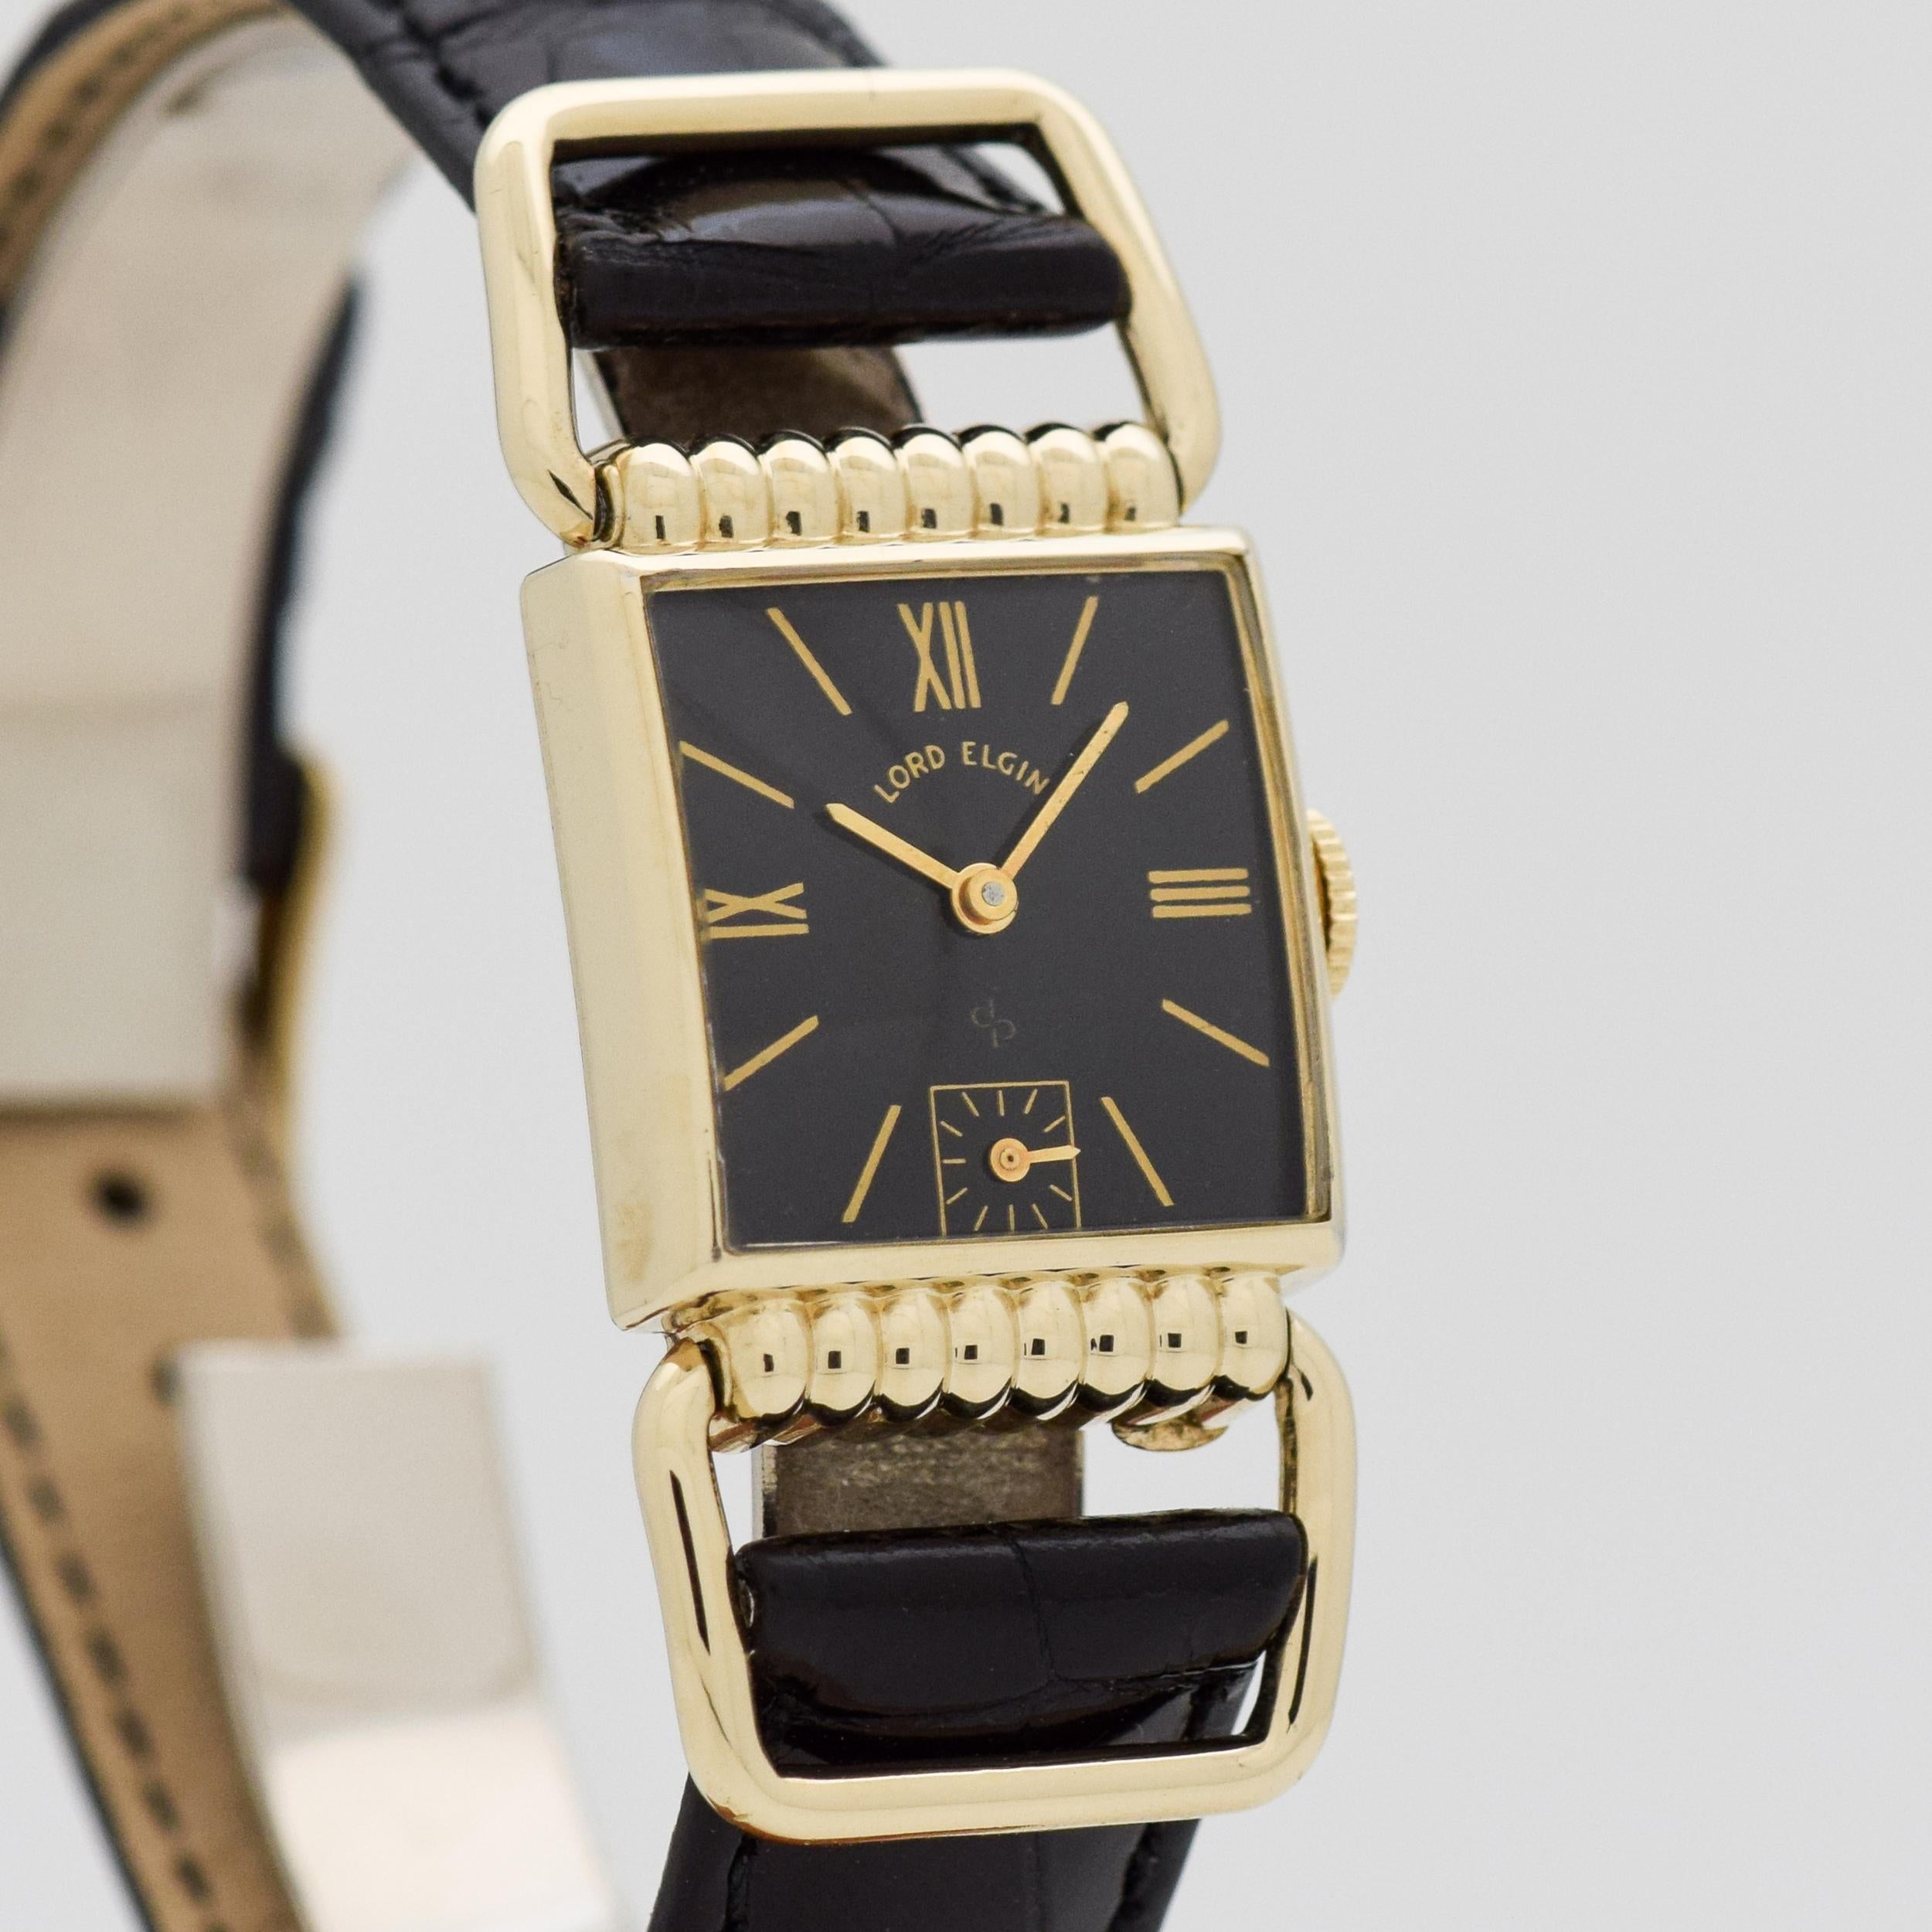 1950 Vintage Lord Elgin Driver's 14k Yellow Gold Filled watch with Original Black Dial with Gold Color Roman Numerals III/ IX, and XII. 20mm x 41mm lug to lug (0.79 in. x 1.61 in.) - 21 jewel, manual caliber movement. Equipped with a 100% Genuine